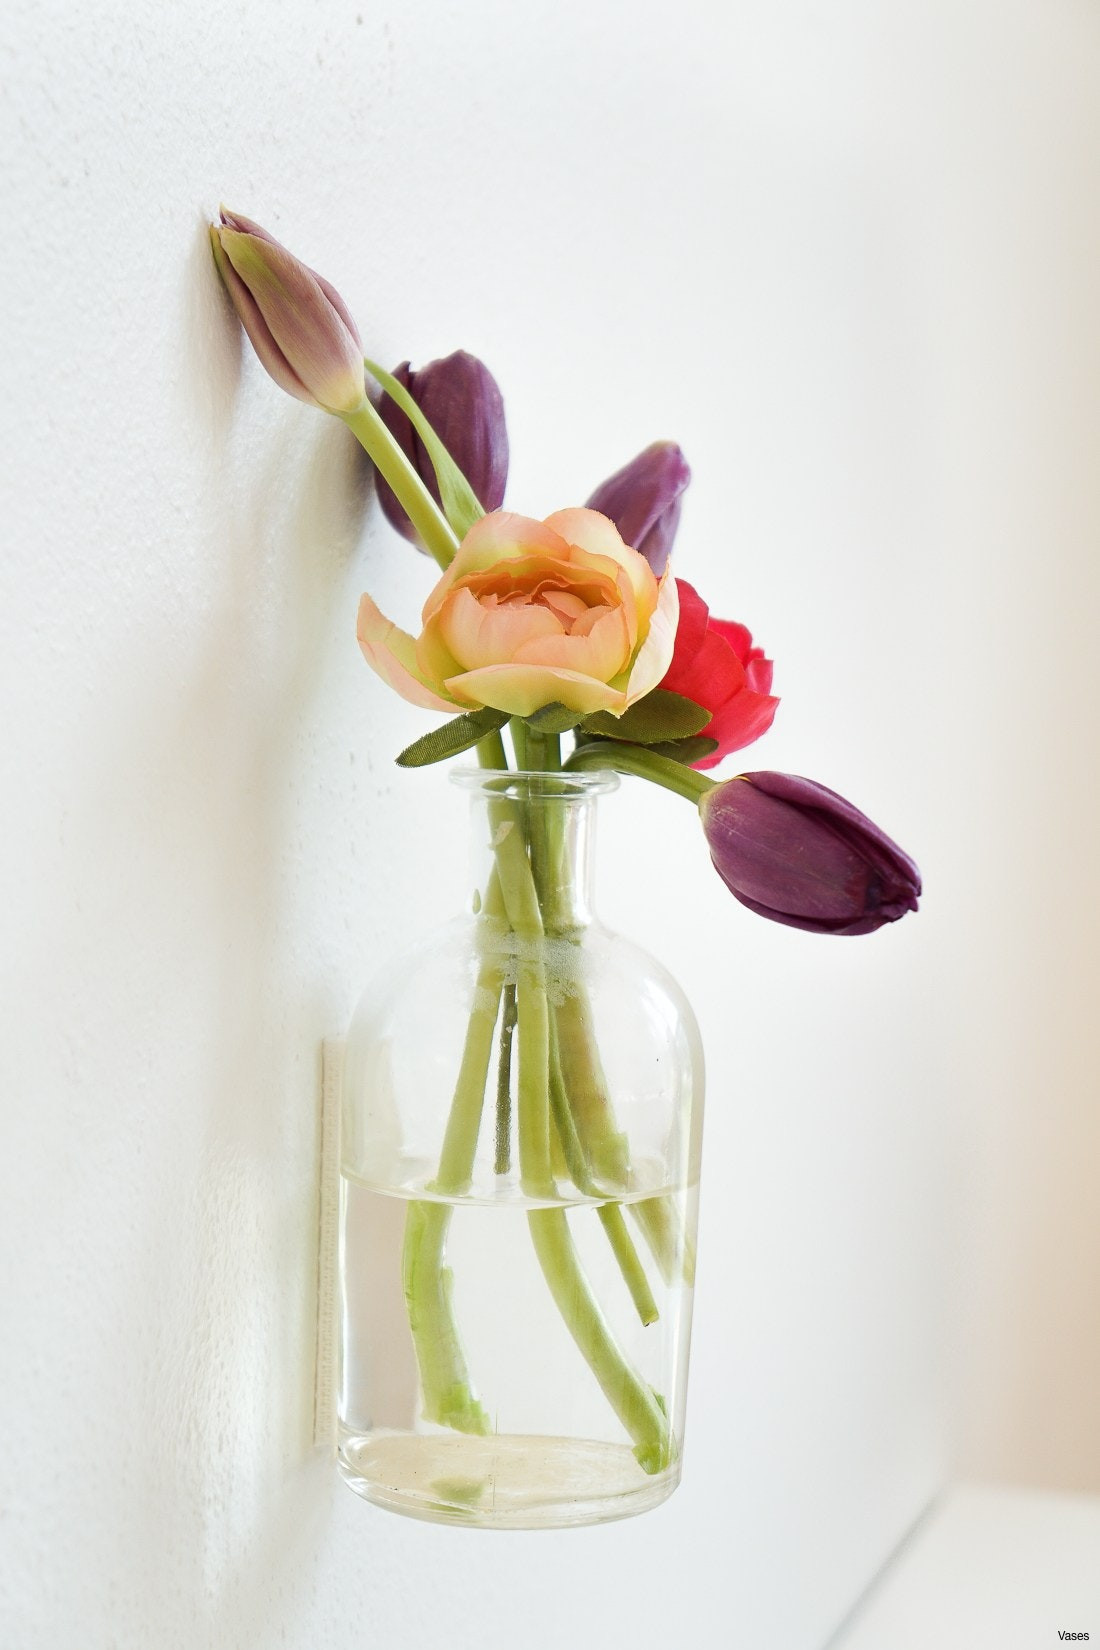 19 attractive Flower and Vase Decor 2024 free download flower and vase decor of wall vase decor images il fullxfull l7e9h vases wall flower vase throughout wall vase decor images il fullxfull l7e9h vases wall flower vase zoomi 0d decor inspirati